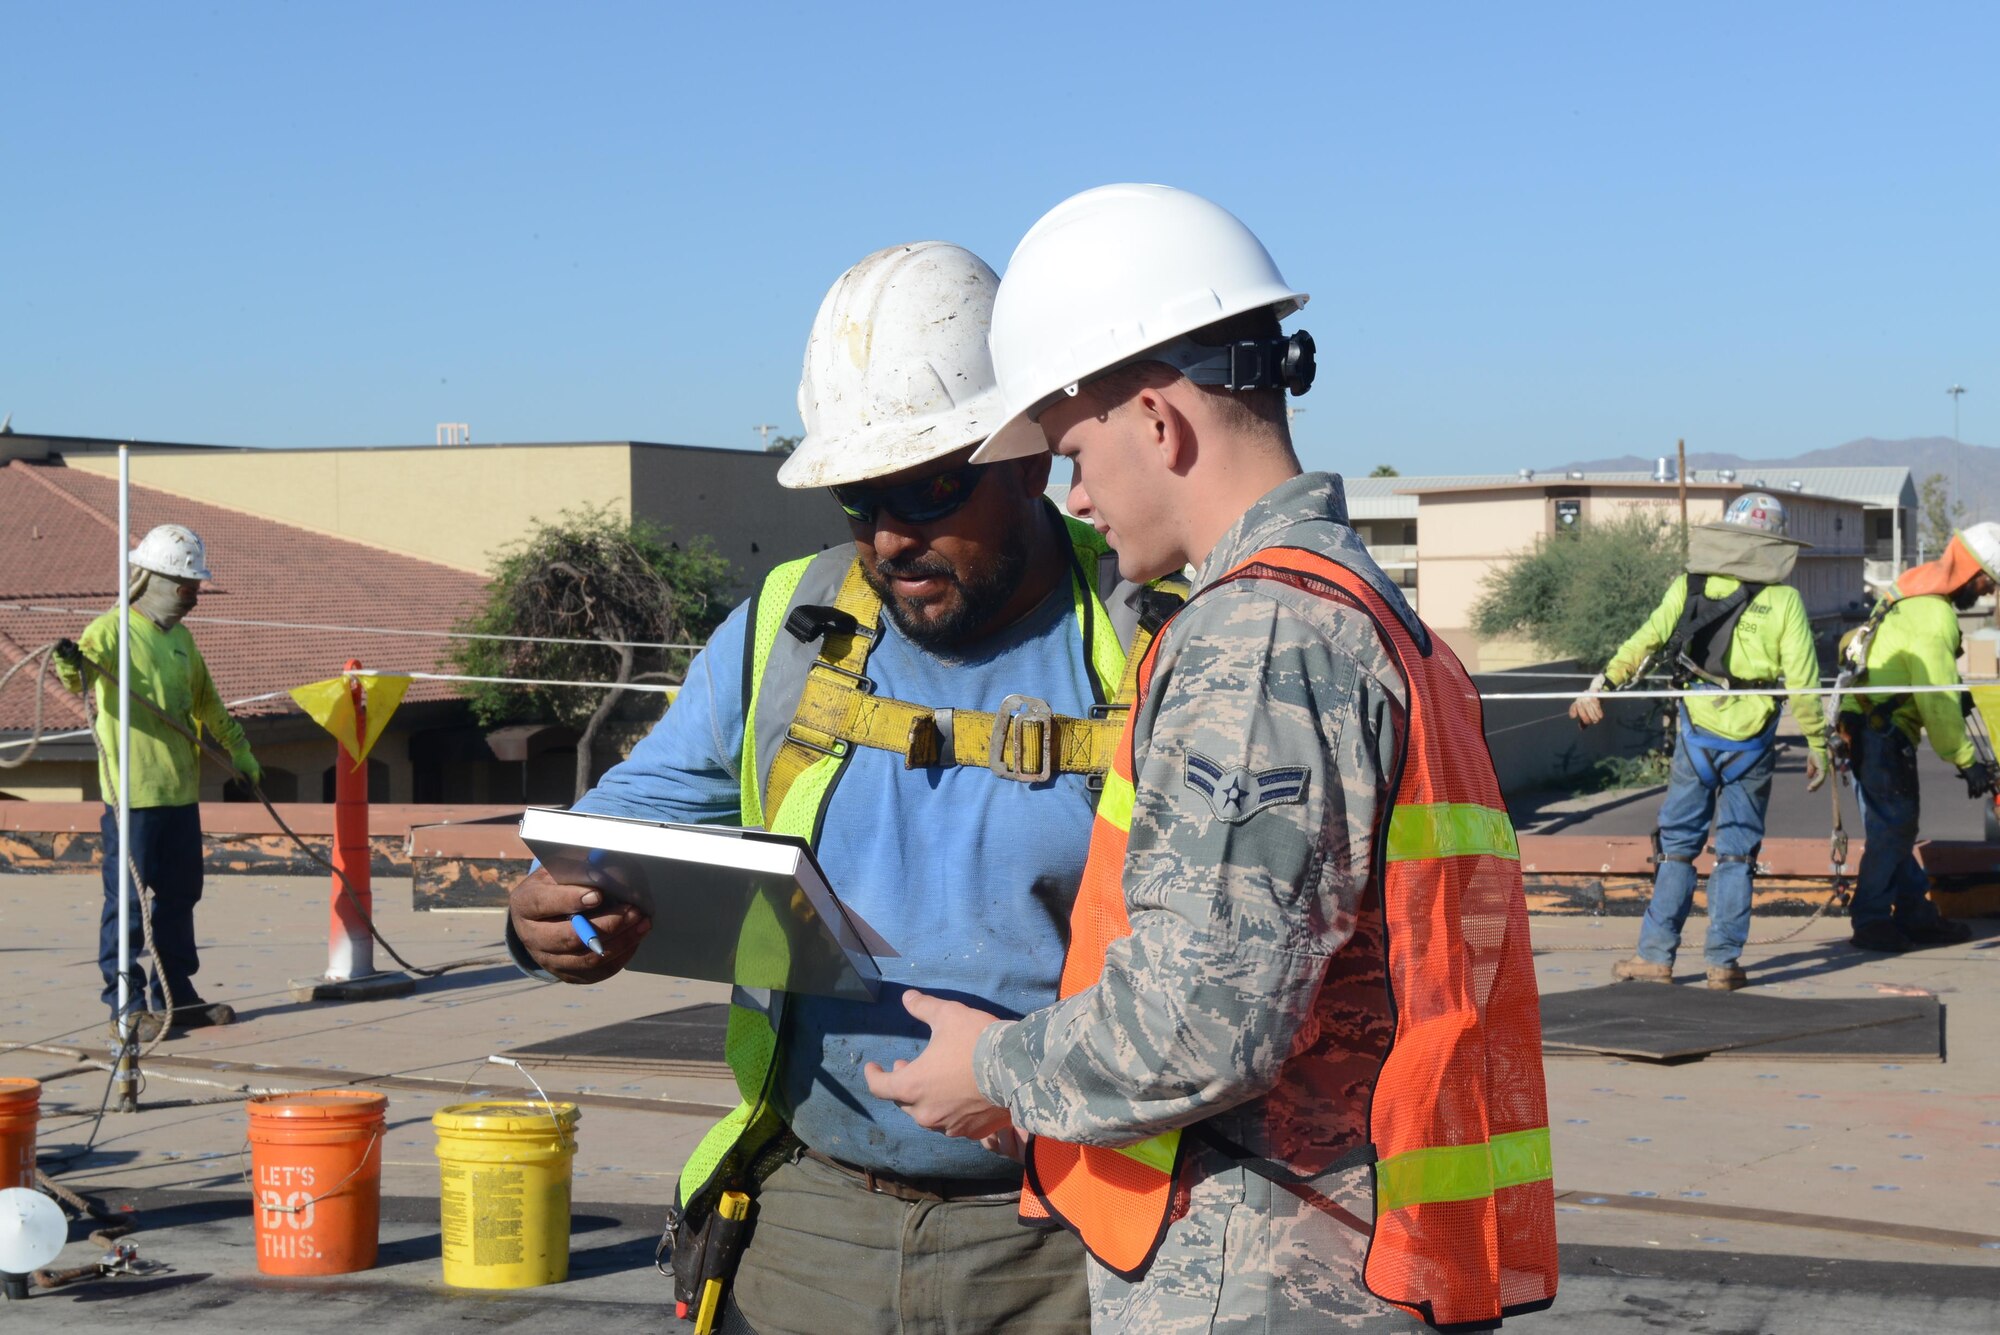 Airman 1st Class Dimitri Pfeifer, 56th Contracting Squadron contract specialist, performs a labor standards interview with Manuel Reyes, Starkweather Roofing Inc. foreman, at Luke Air Force Base, Ariz., Sept. 20, 2017. The labor standards interview was part of a site survey at the Security Forces Squadron rooftop. Pfeifer made sure the subcontractors and workers were receiving pay appropriate to the job. (U.S. Air Force photo by Senior Airman James Hensley)